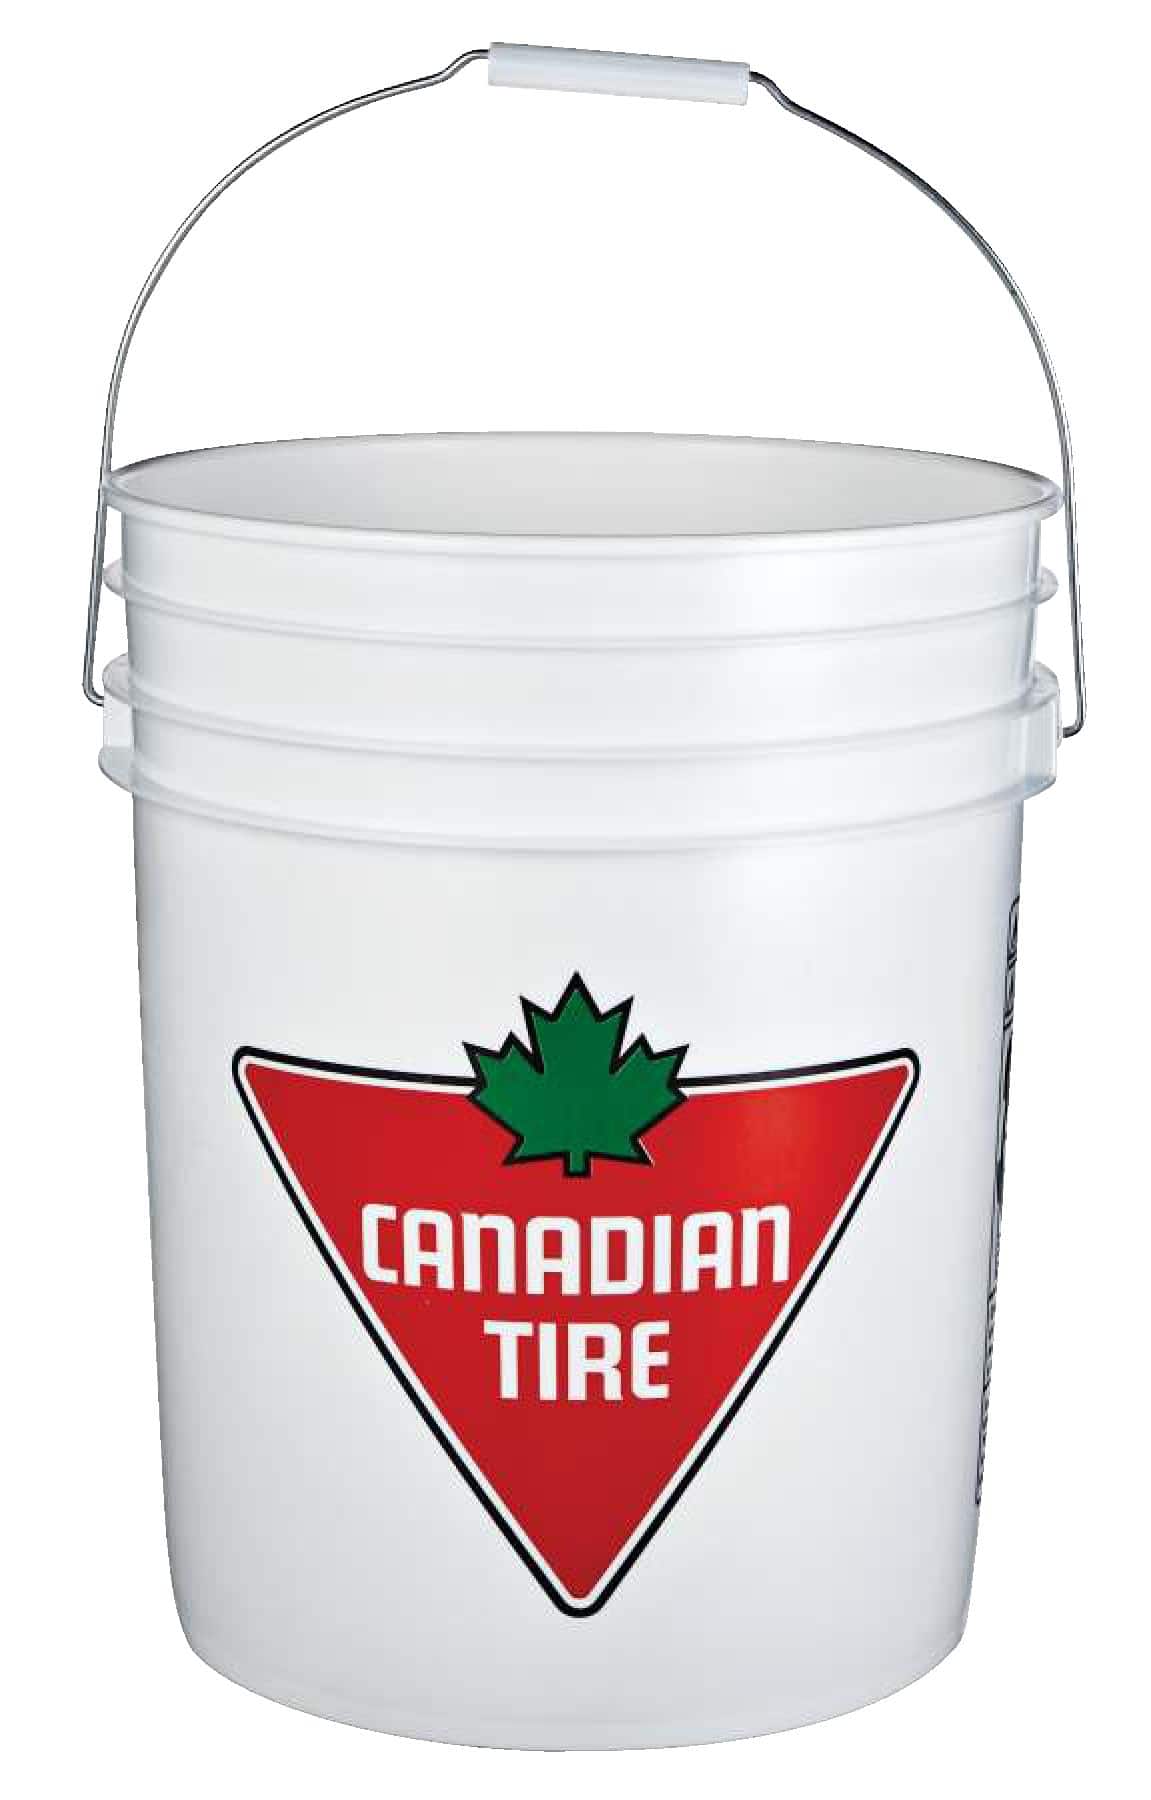 https://media-www.canadiantire.ca/product/fixing/tools/tool-storage/0581060/bucket-5-gallon-95ccc203-427d-47a5-b844-31f58345bbae-jpgrendition.jpg